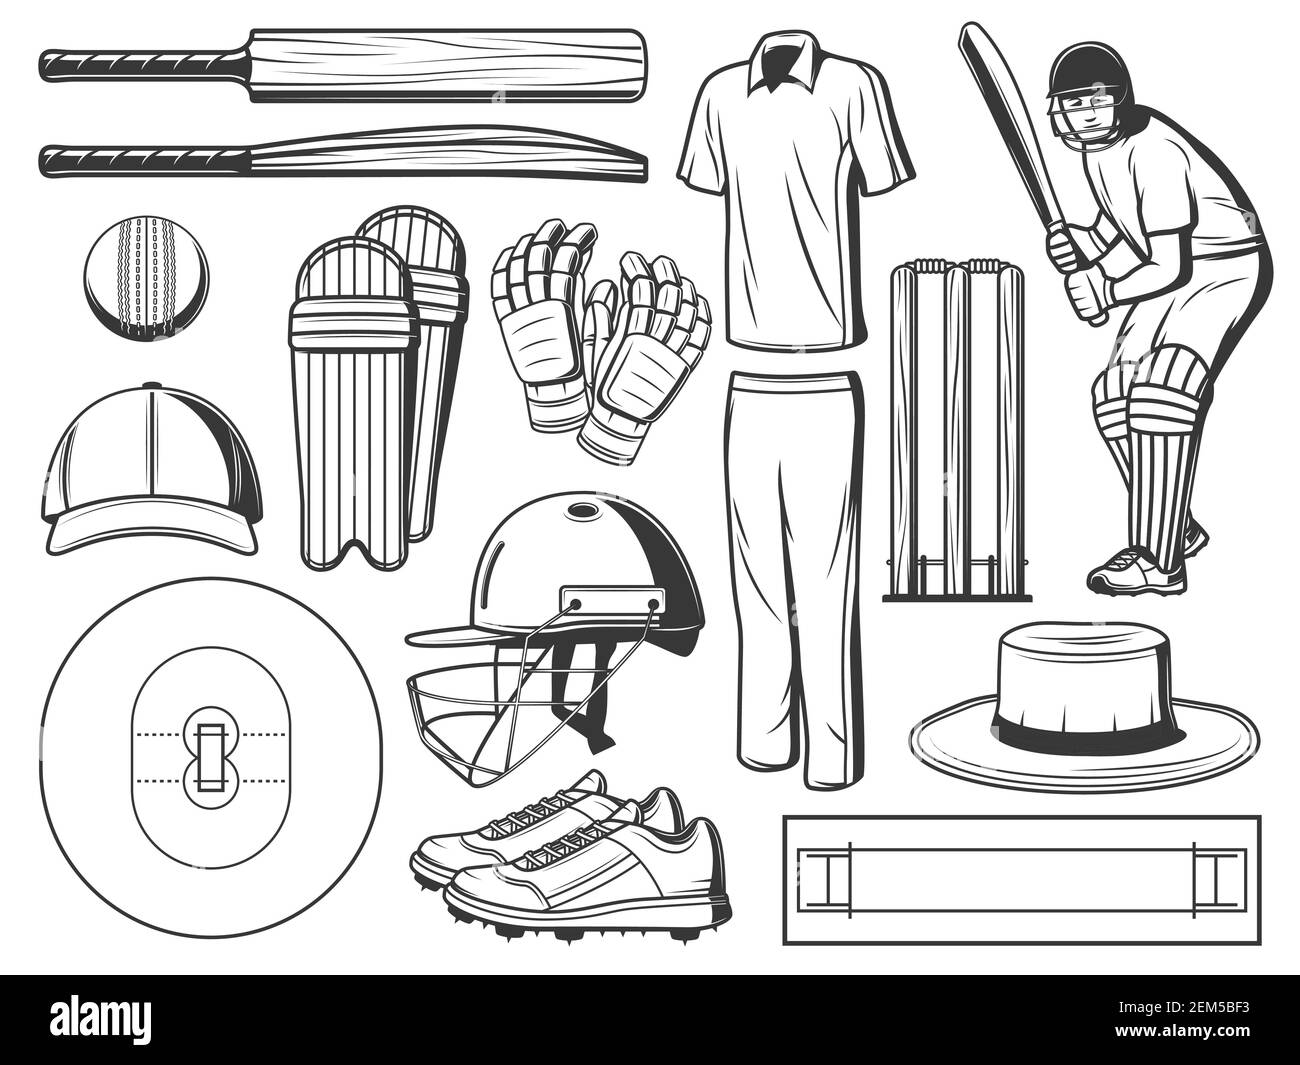 Cricket glove Black and White Stock Photos & Images - Alamy